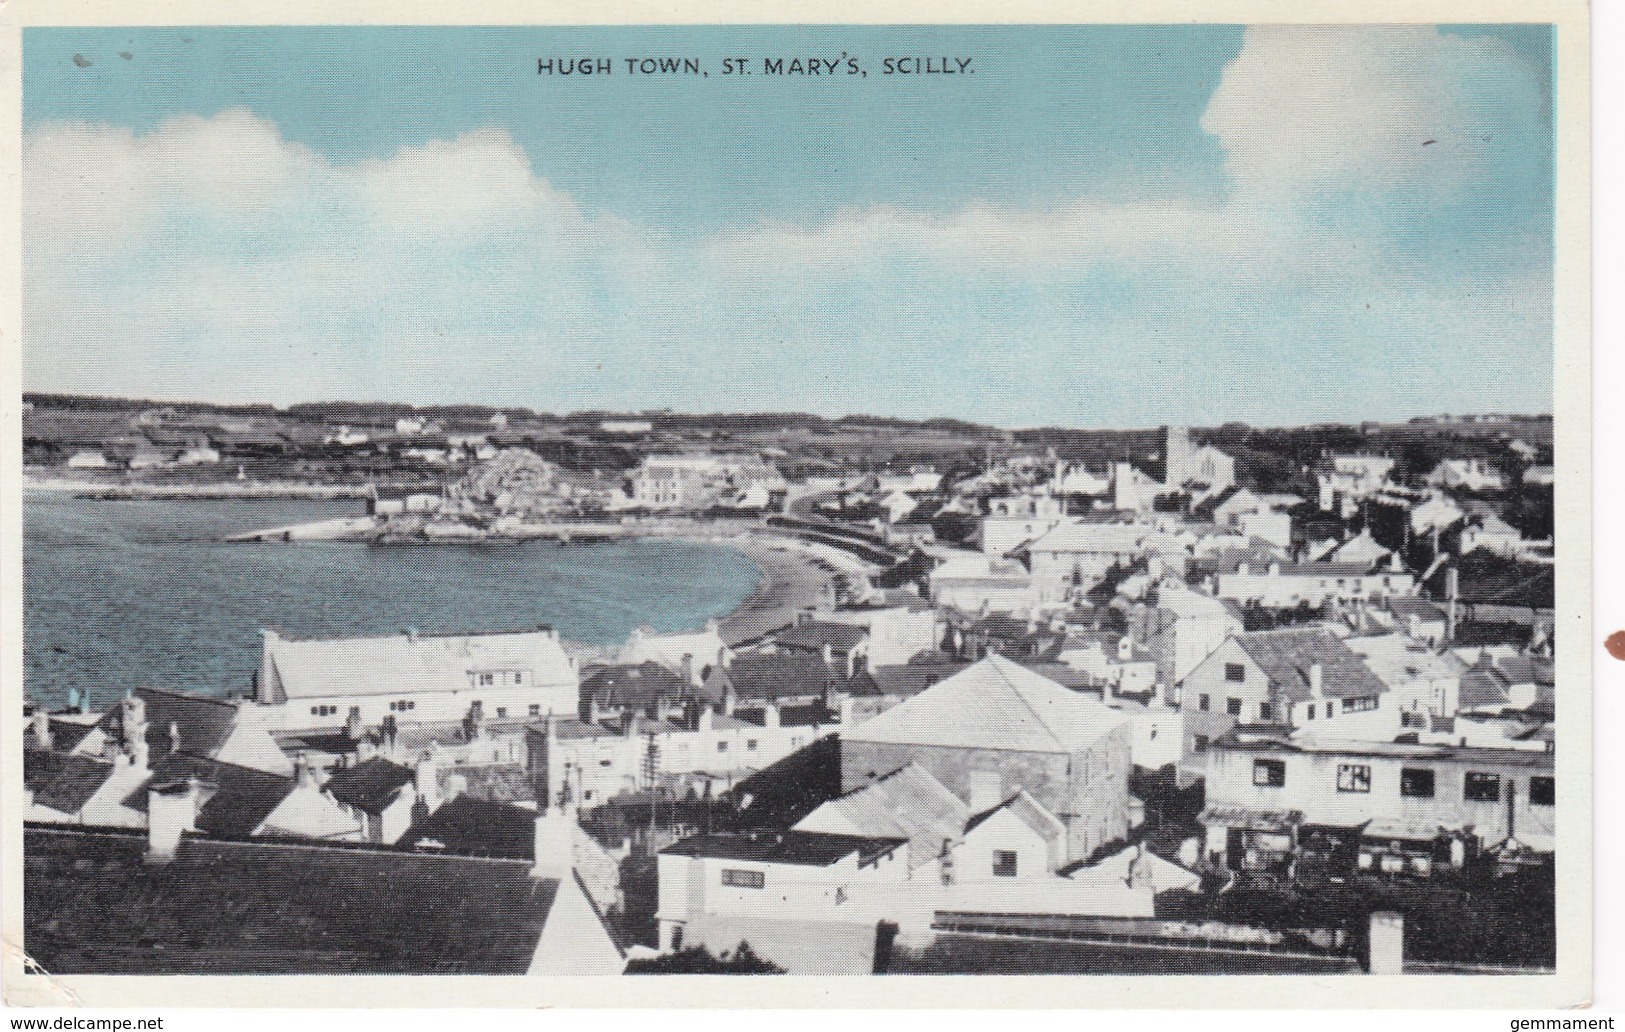 HUGH TOWN, ST MARYS - Scilly Isles